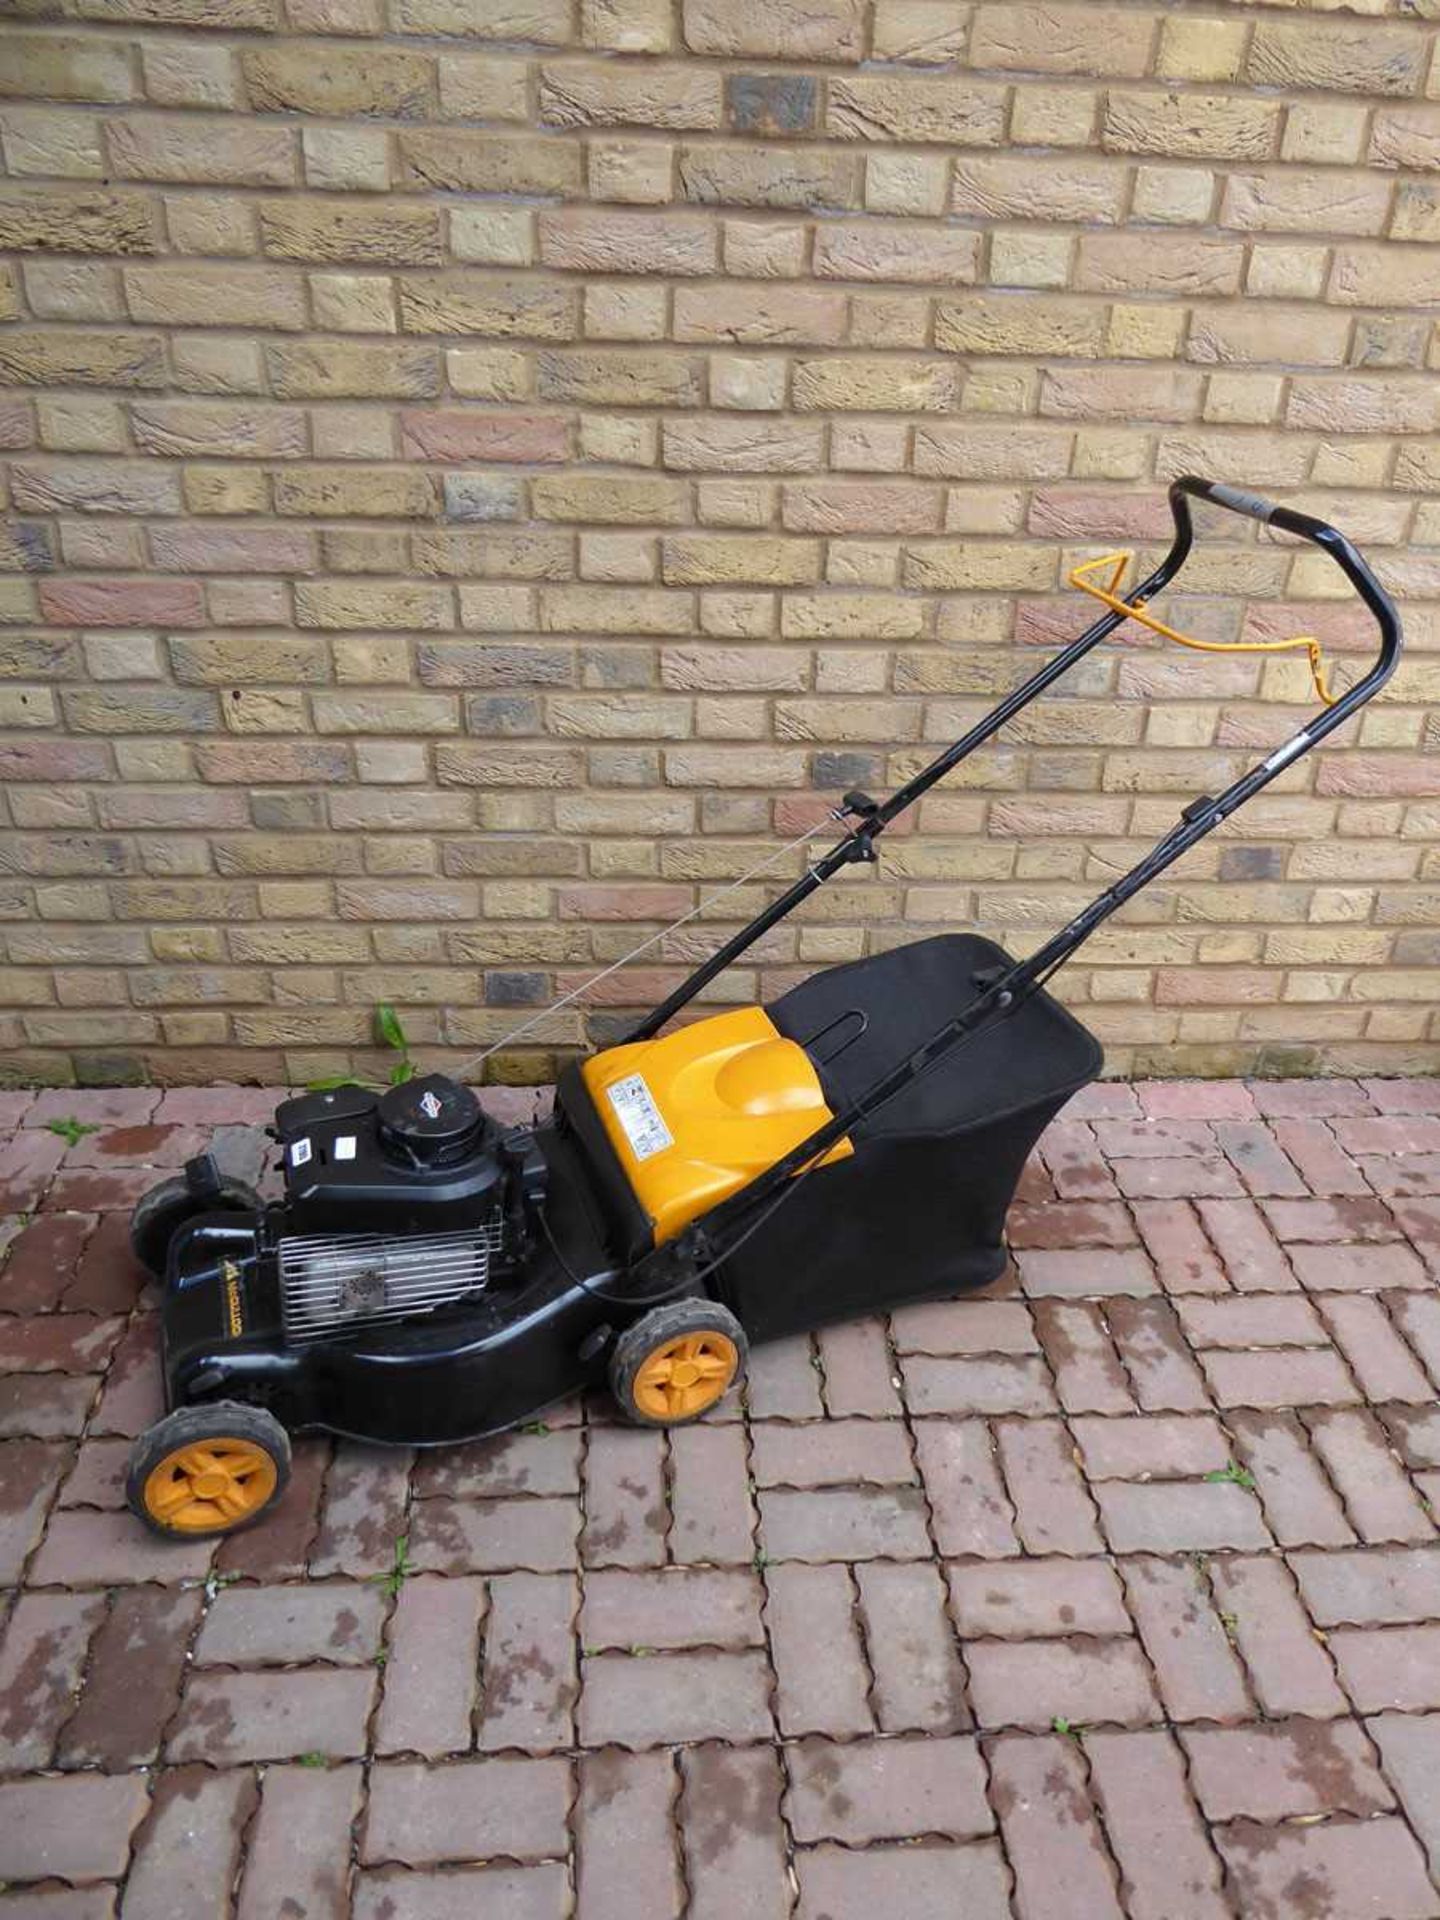 McCulloch hand propelled petrol lawnmower